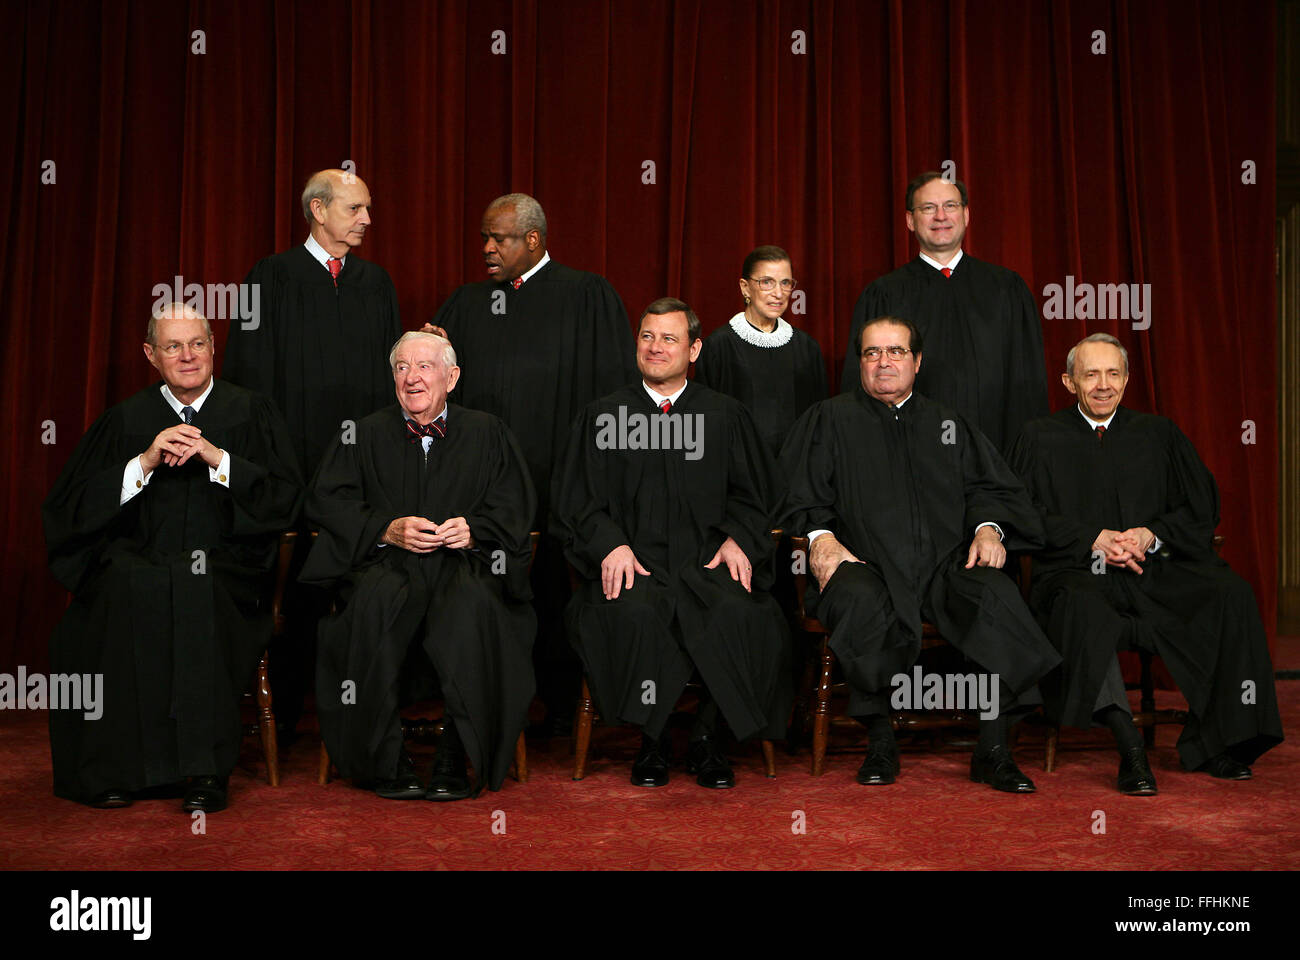 Washington, DC - March 3, 2006 -- 2006 Class Portrait of the Justices of the United States Supreme Court taken March 3, 2006, at the United States Supreme Court Building in Washington, DC Seated in the front row, from left to right are: Associate Justice Anthony M. Kennedy, Associate Justice John Paul Stevens, Chief Justice of the United States John G. Roberts, Jr., Associate Justice Antonin Scalia, and Associate Justice David Souter. Standing, from left to right, in the top row, are: Associate Justice Stephen Breyer, Associate Justice Clarence Thomas, Associate Justice Ruth Bader Ginsburg Stock Photo